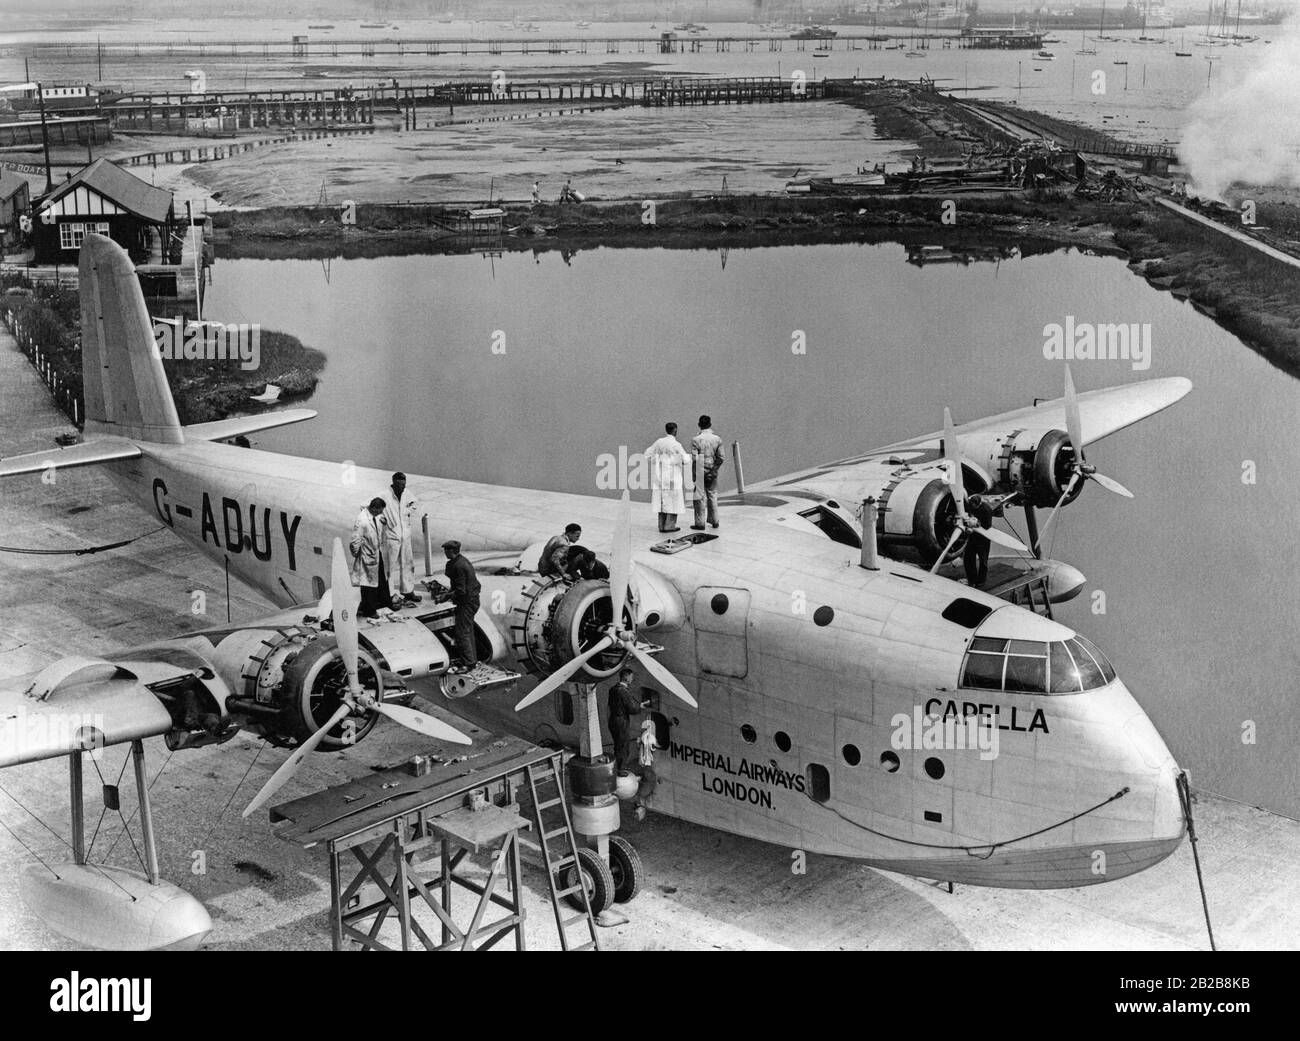 A flying boat of the type Short Empire ( named 'Capella') during maintenance work in the dock in Southampton. Stock Photo